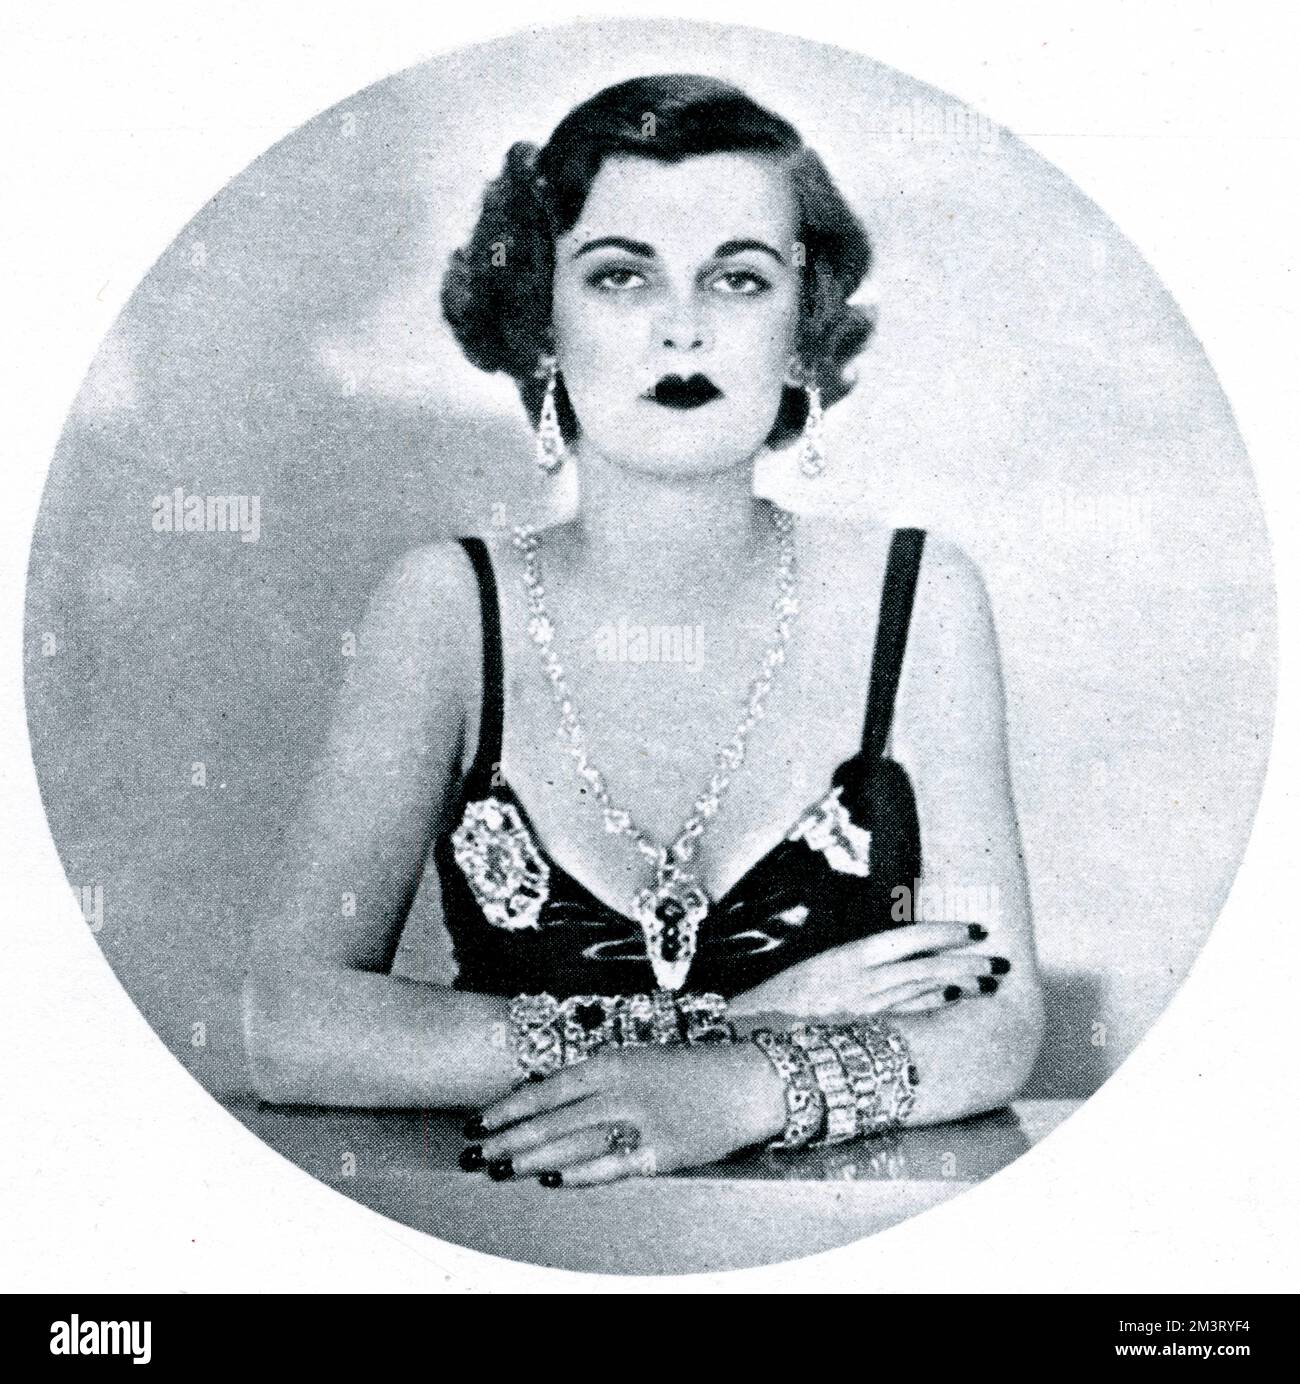 Miss Margaret Whigham, celebrated debutante and 'it' girl, later Mrs Charles Sweeny and then the Duchess of Argyll, whose divorce case in 1963 scandalised the country, pictured as 'The Precious One' in the Lovelies Parade at the Gay Party at the Café de Paris on 15 December 1932.      Date: 1932 Stock Photo